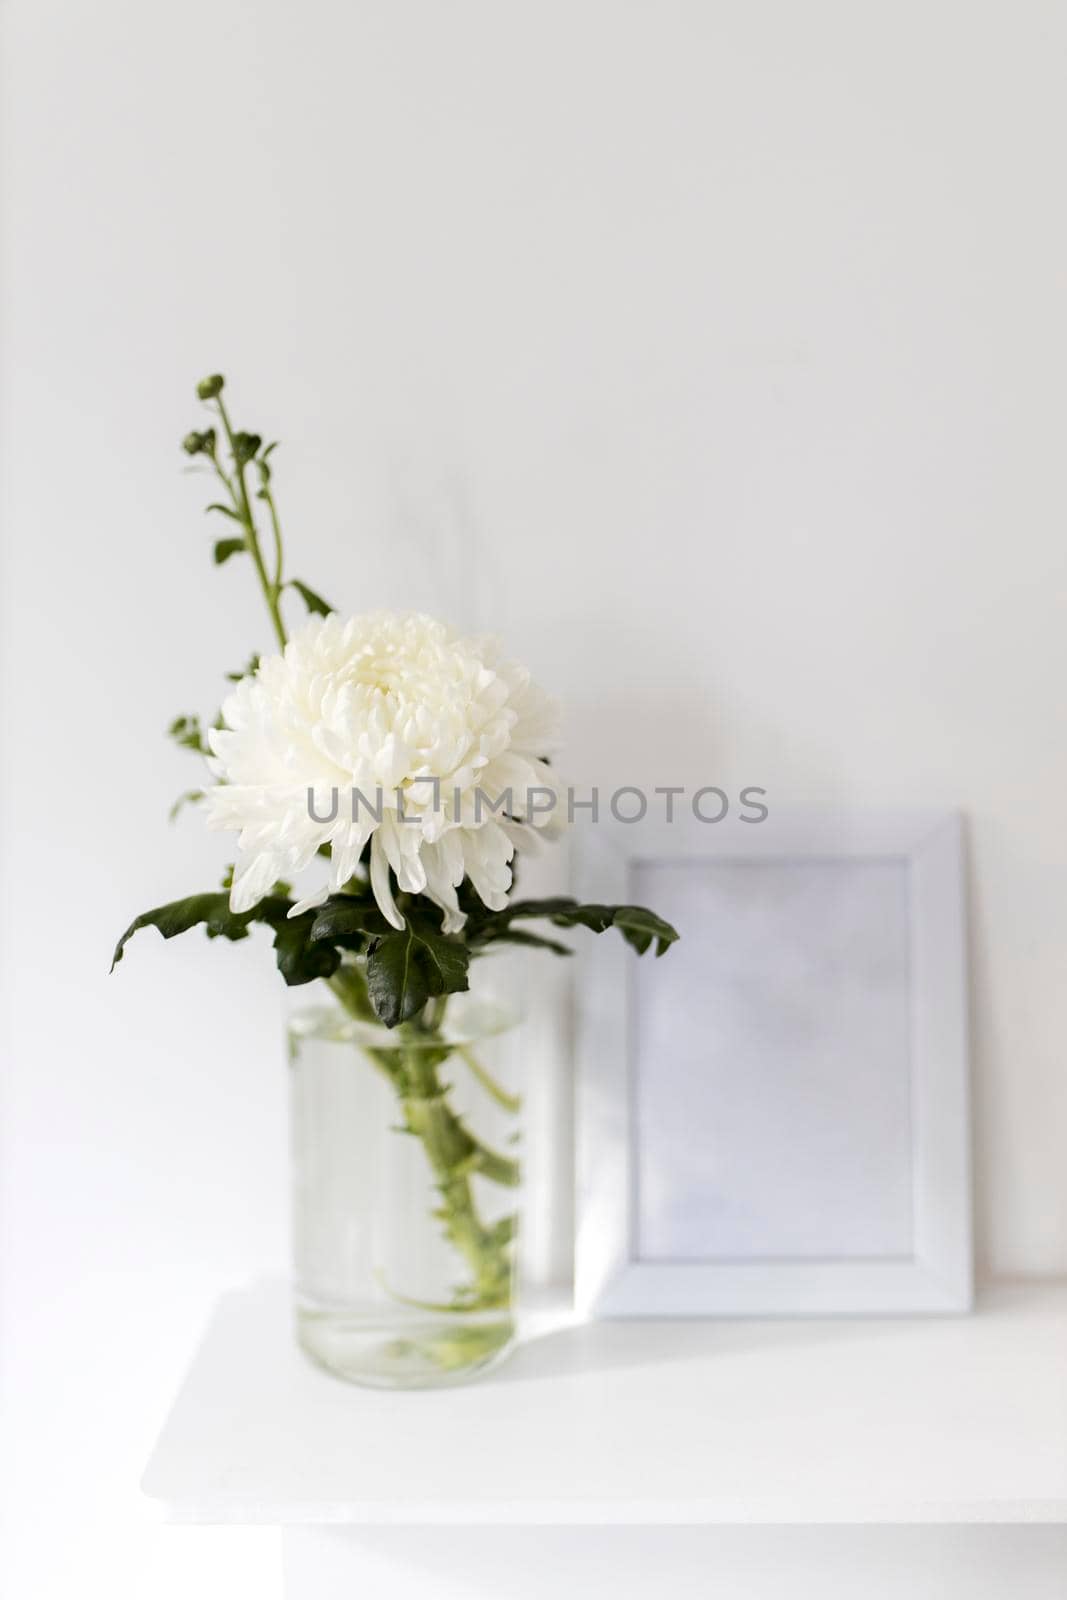 Large chrysanthemum in a glass vase. Photo frame with place for text, by elenarostunova